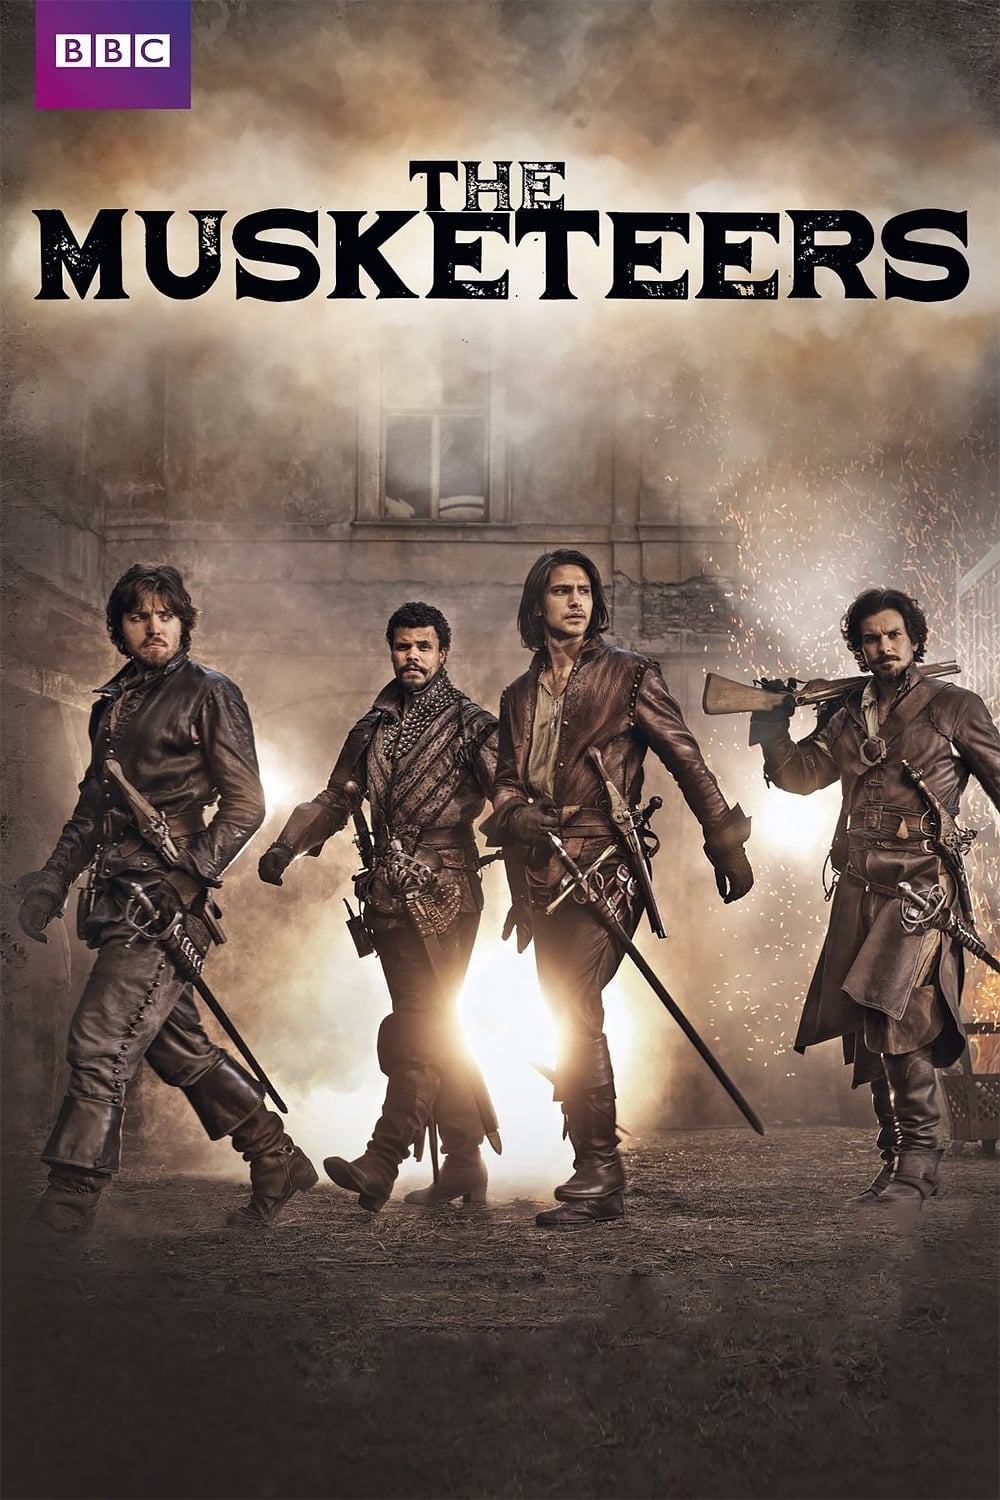 The Musketeers (2014) 3x10